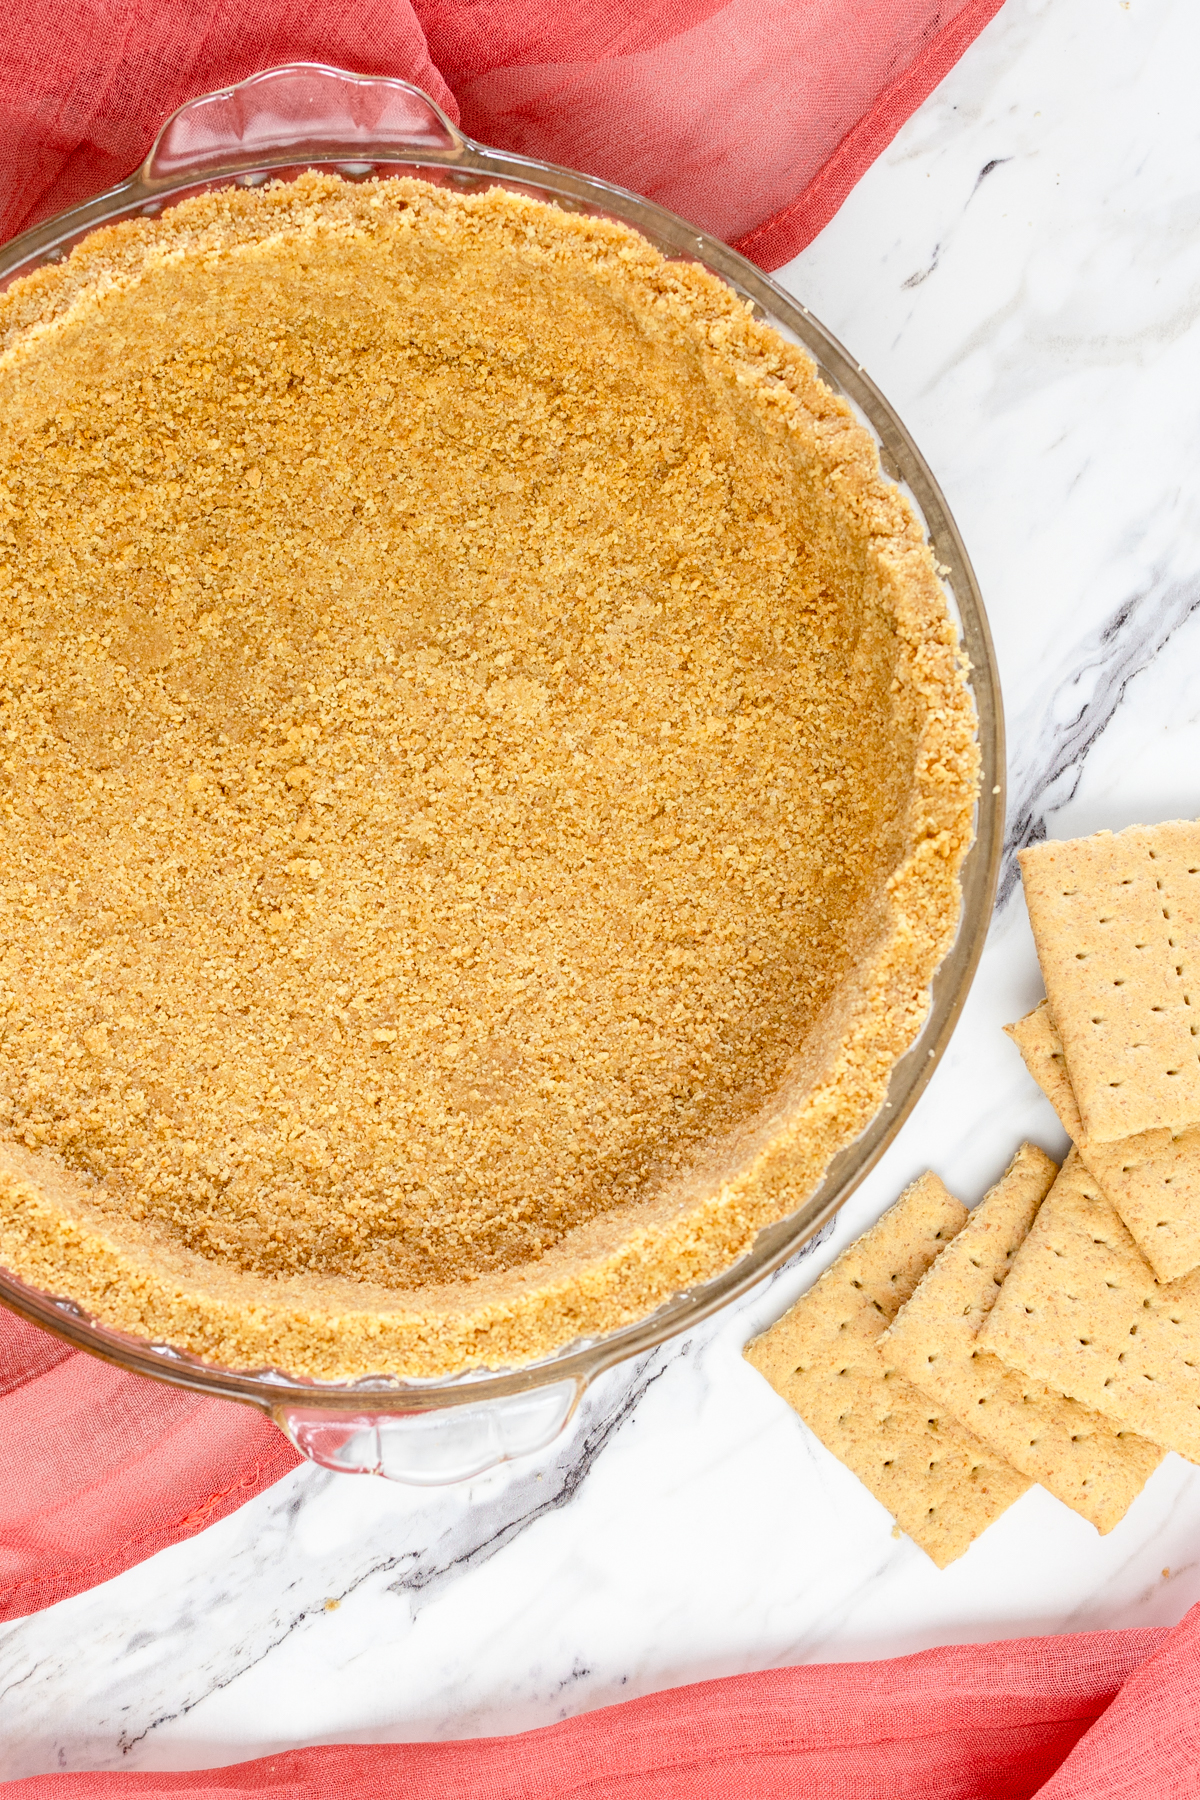 Top view of a graham cracker crust in a glass pie dish with graham crackers lying on the table next to it. 